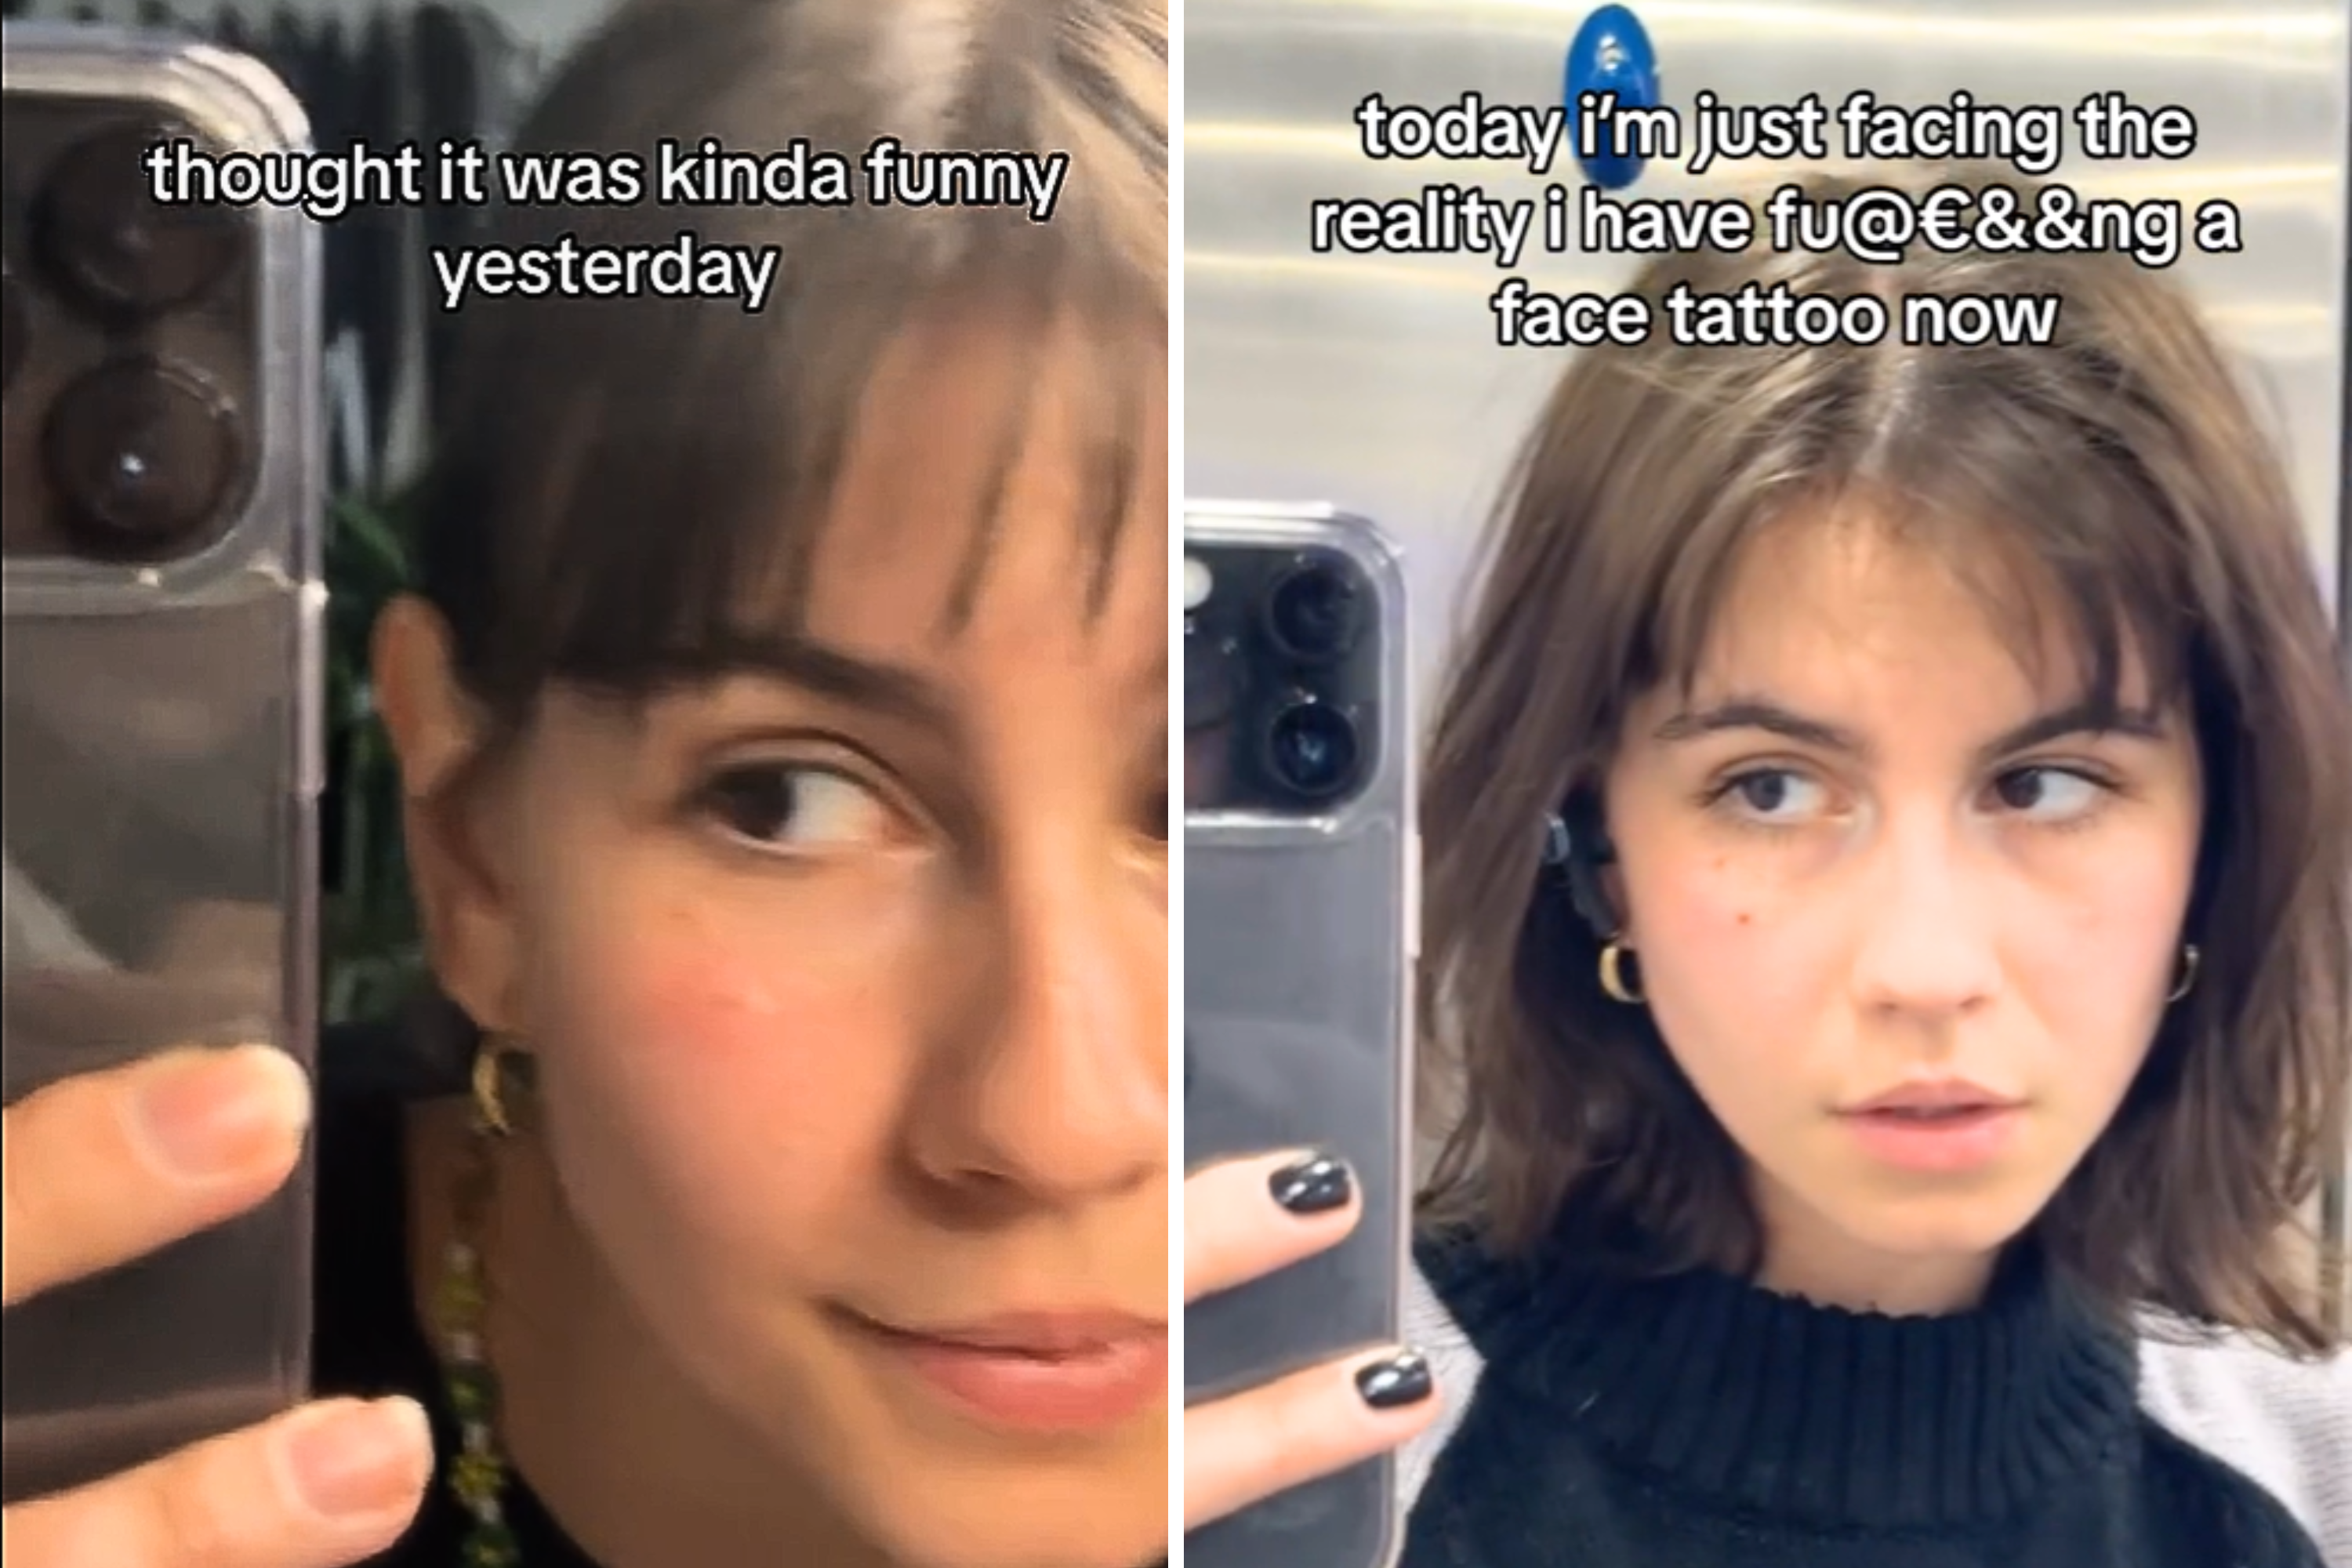 Tattoo artist accidentally inks her own face when drawing backfires